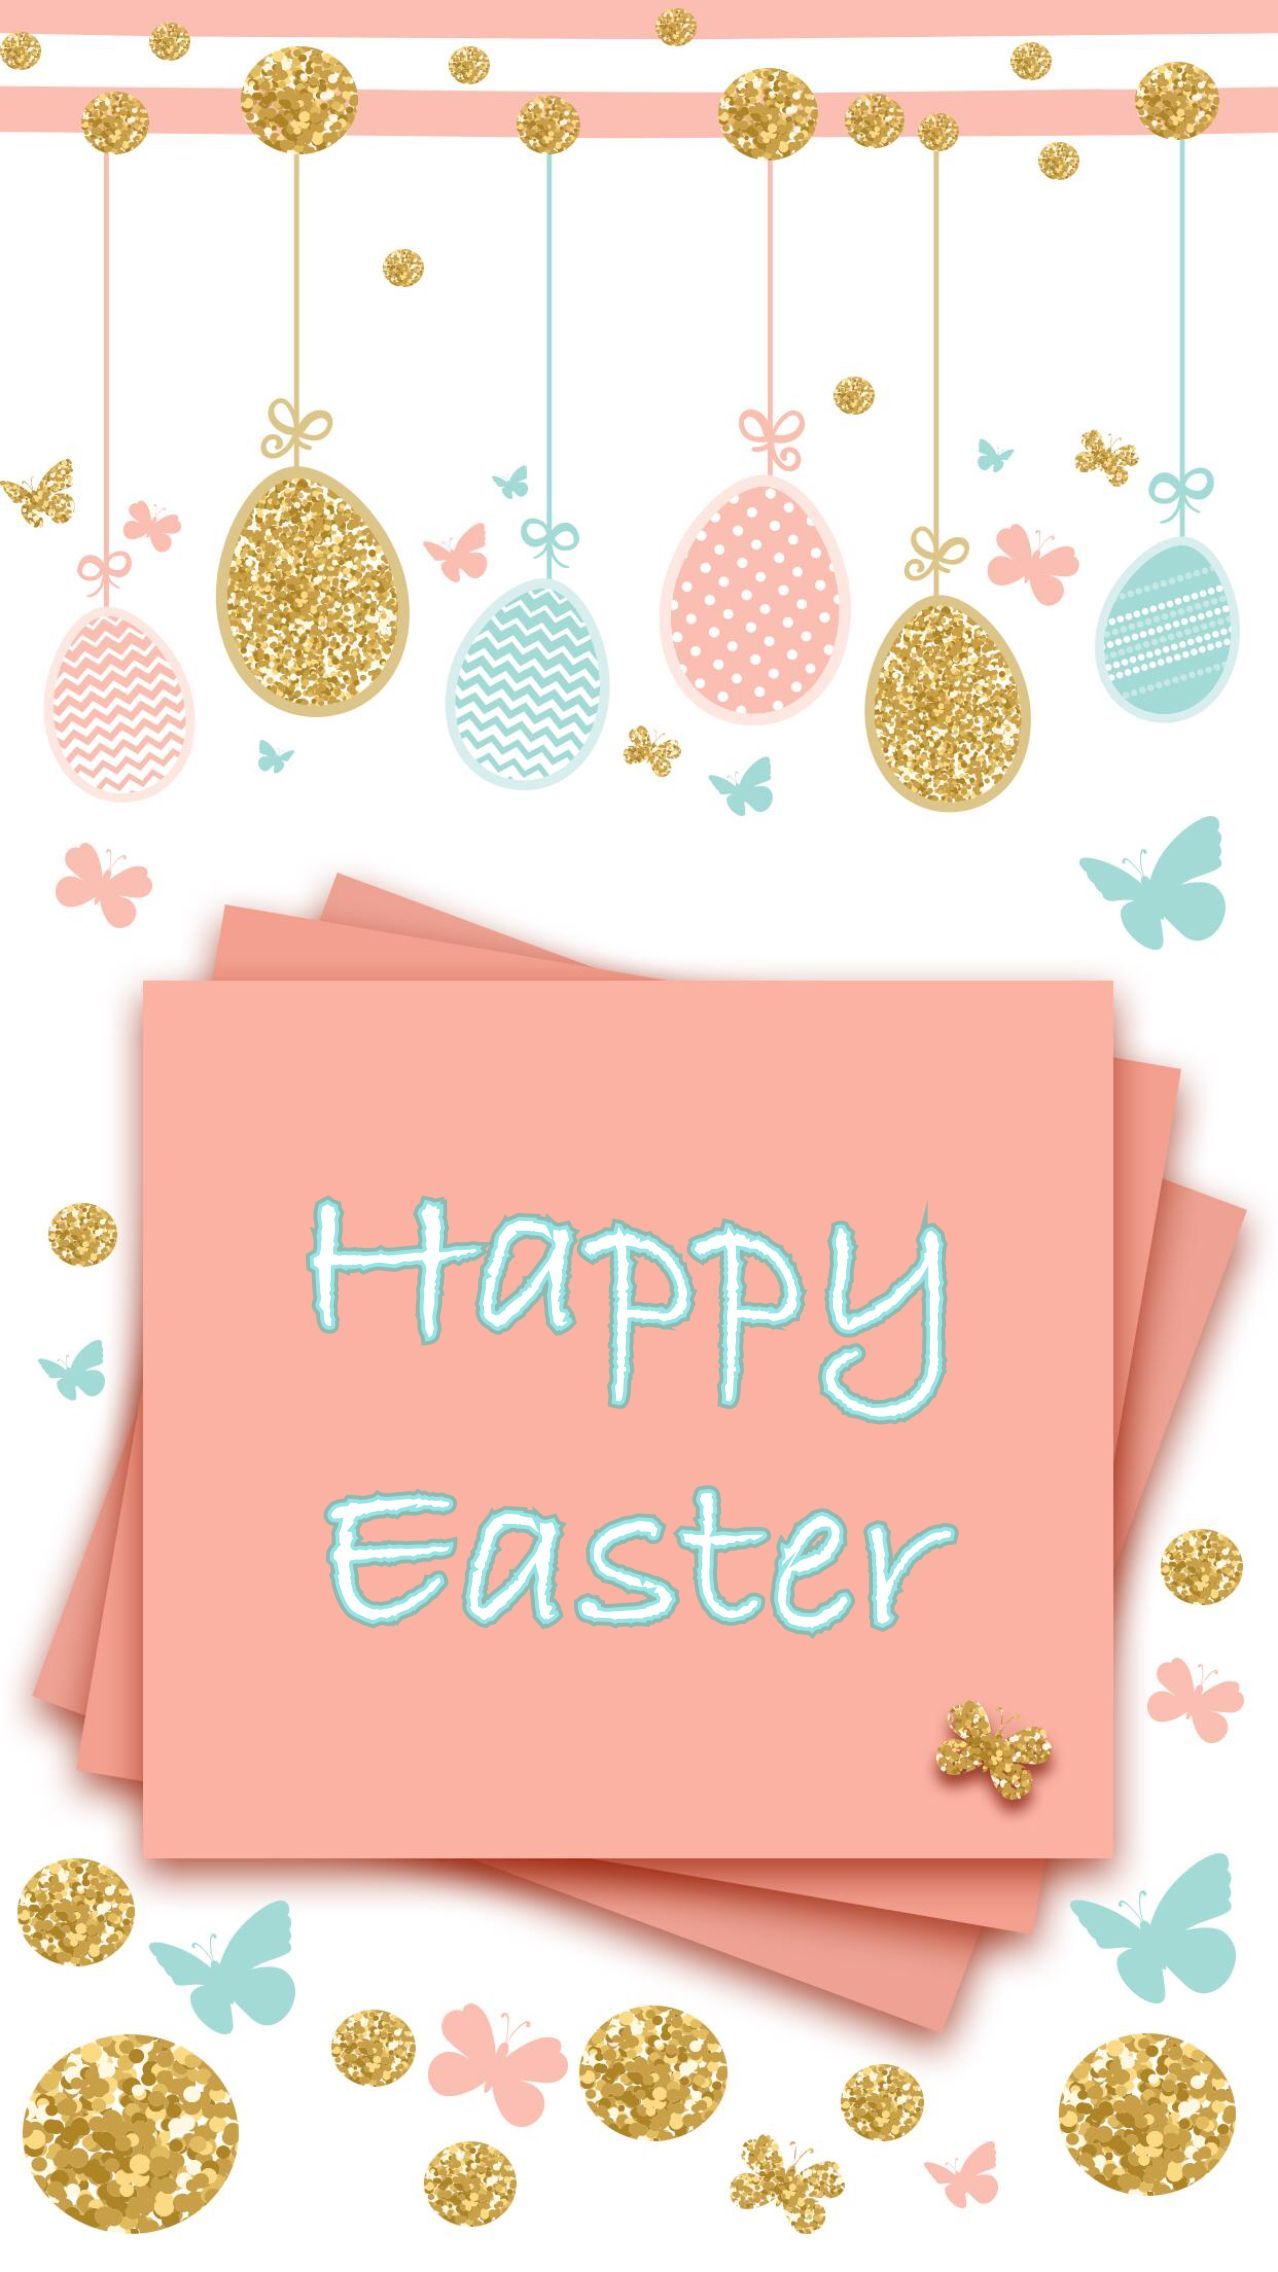 Easter wallpaper image by